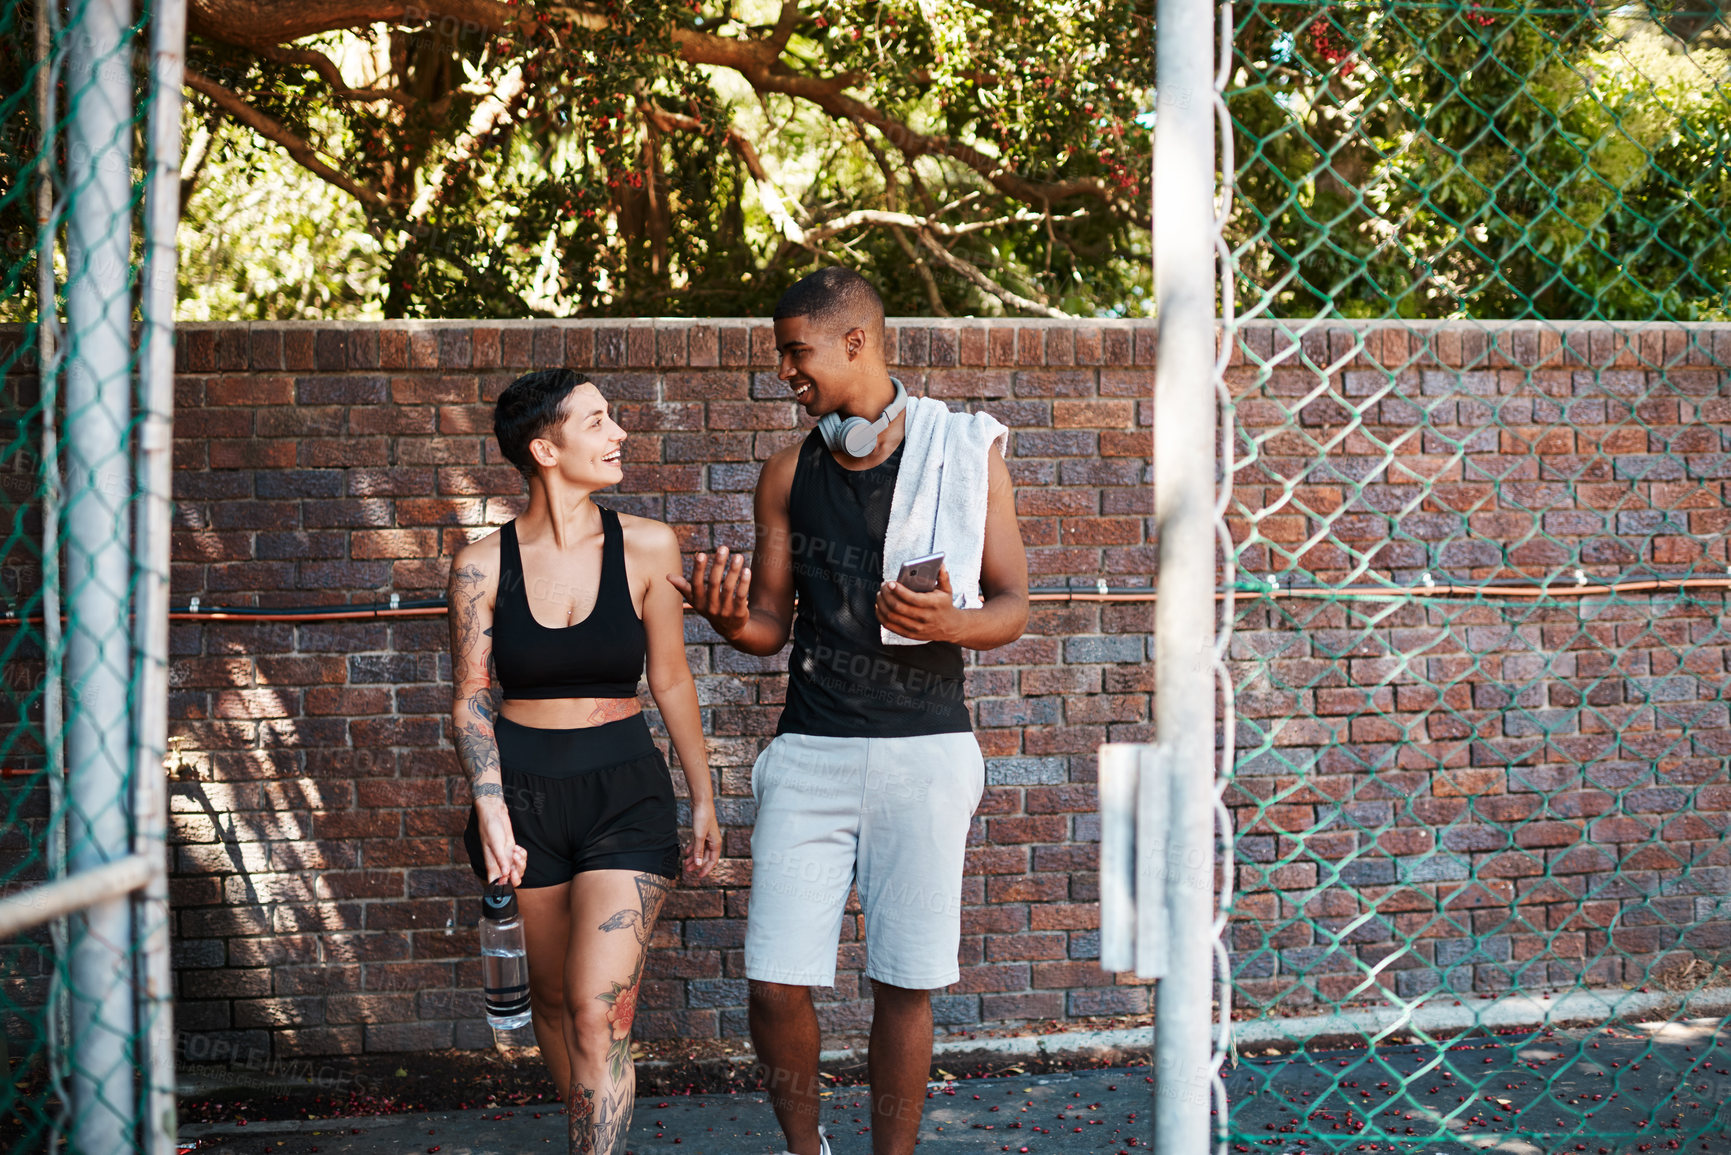 Buy stock photo Shot of two sporty young people chatting to each other while walking into a sports court